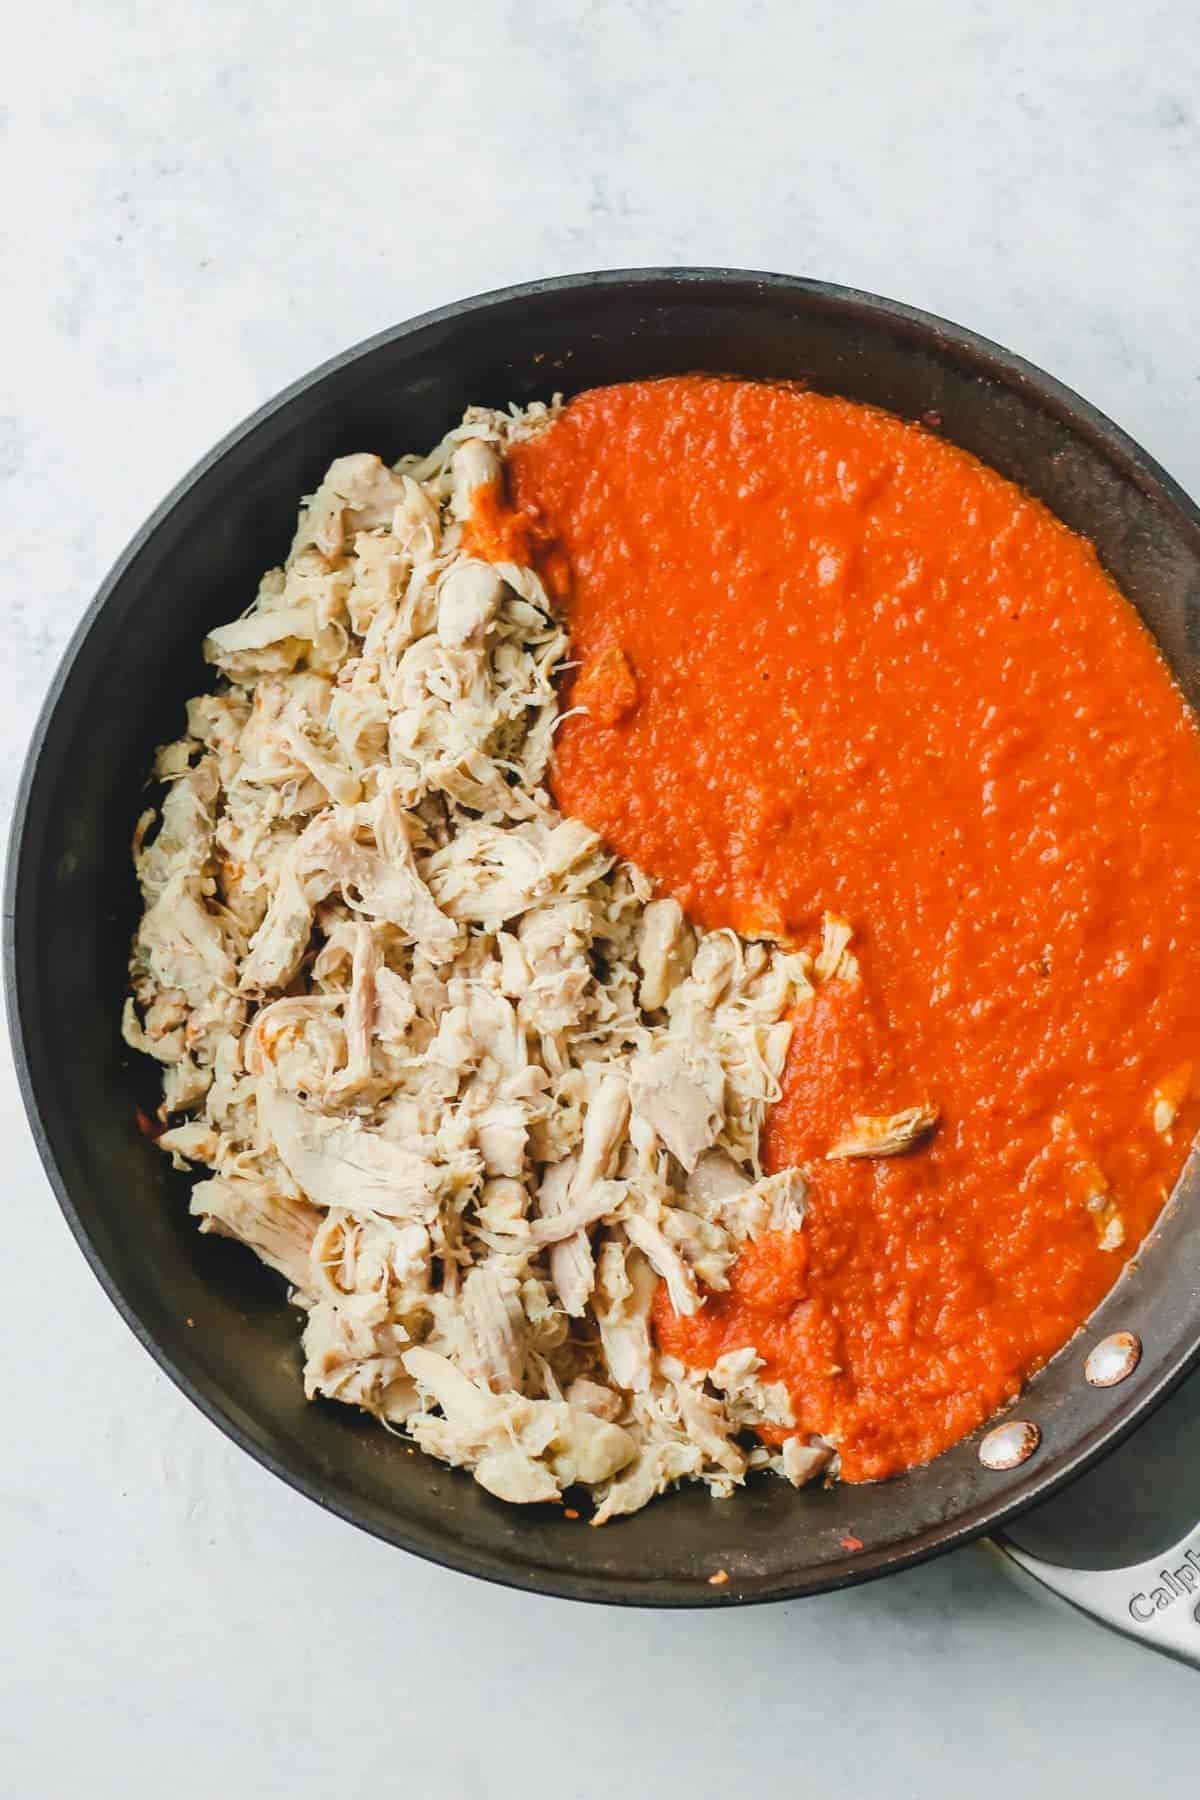 Shredded chicken and red sauce in a skillet